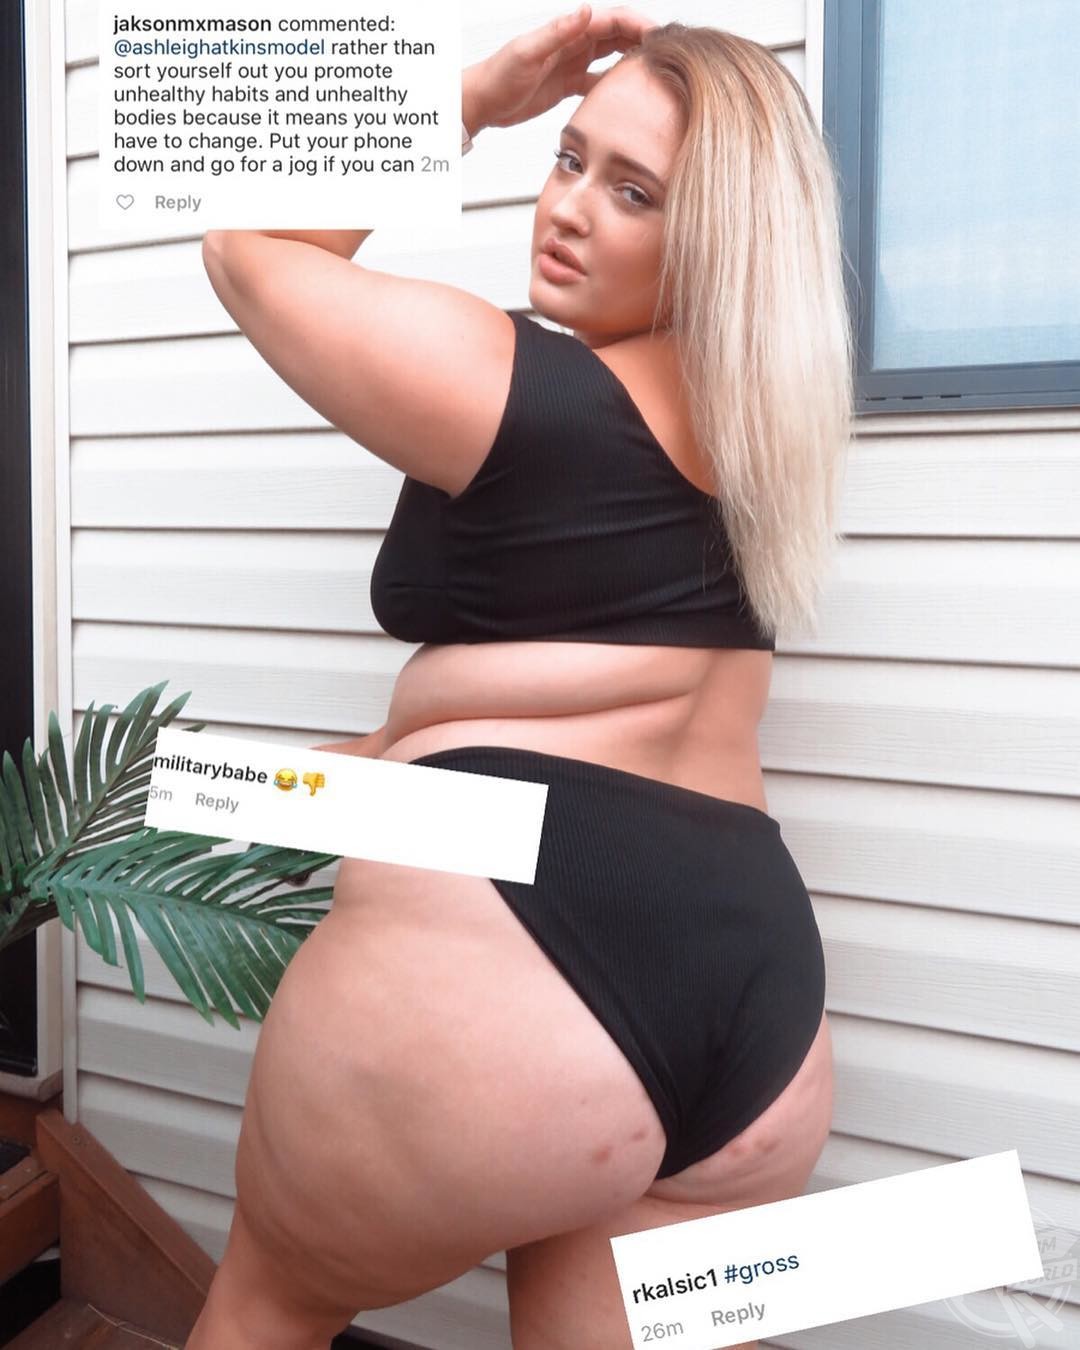 Trolls Wished Cancer On This Plus Size Woman For Sharing Semi Nude